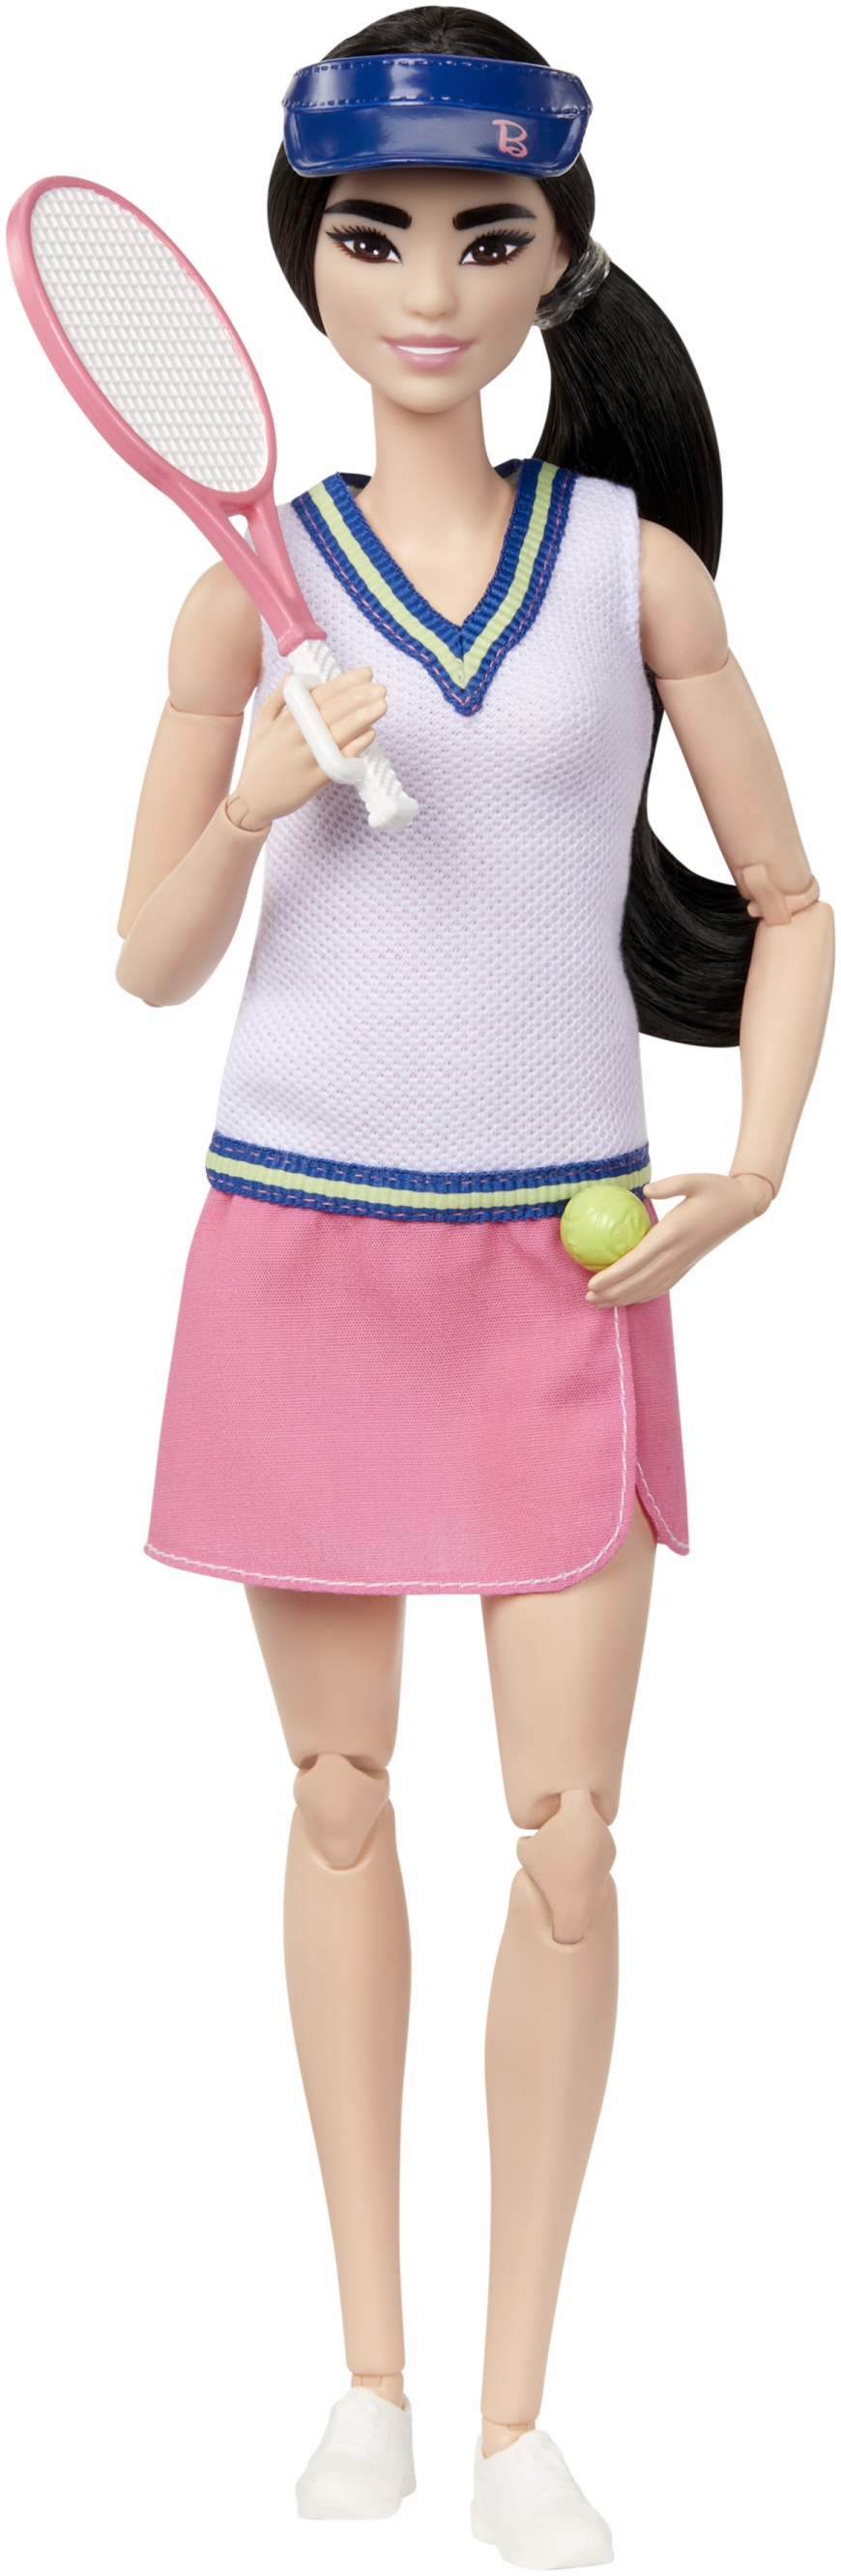 Barbie Made to Move doll 2023 Tennis Player Player